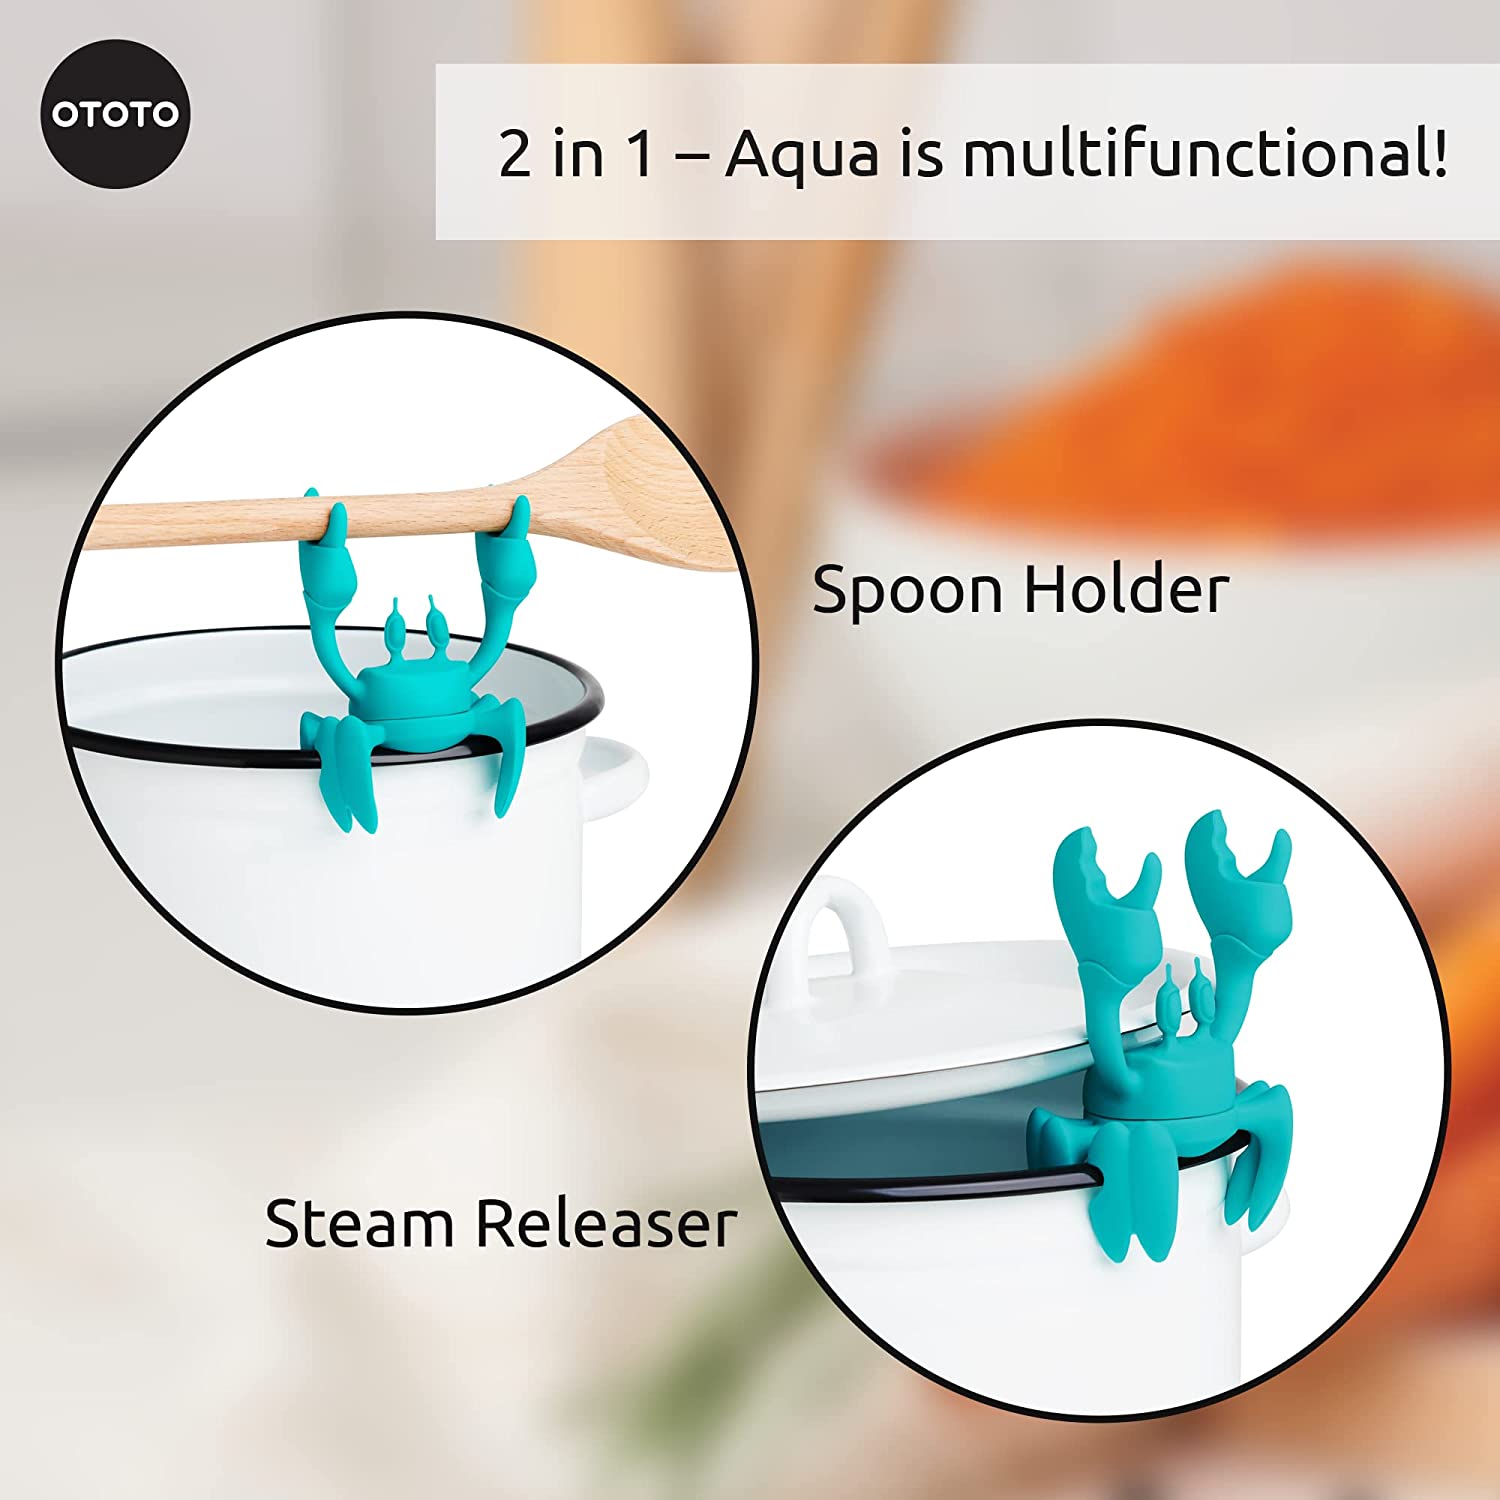 Splatypus: A Spoon That Lets You Get To Every Nook And Cranny